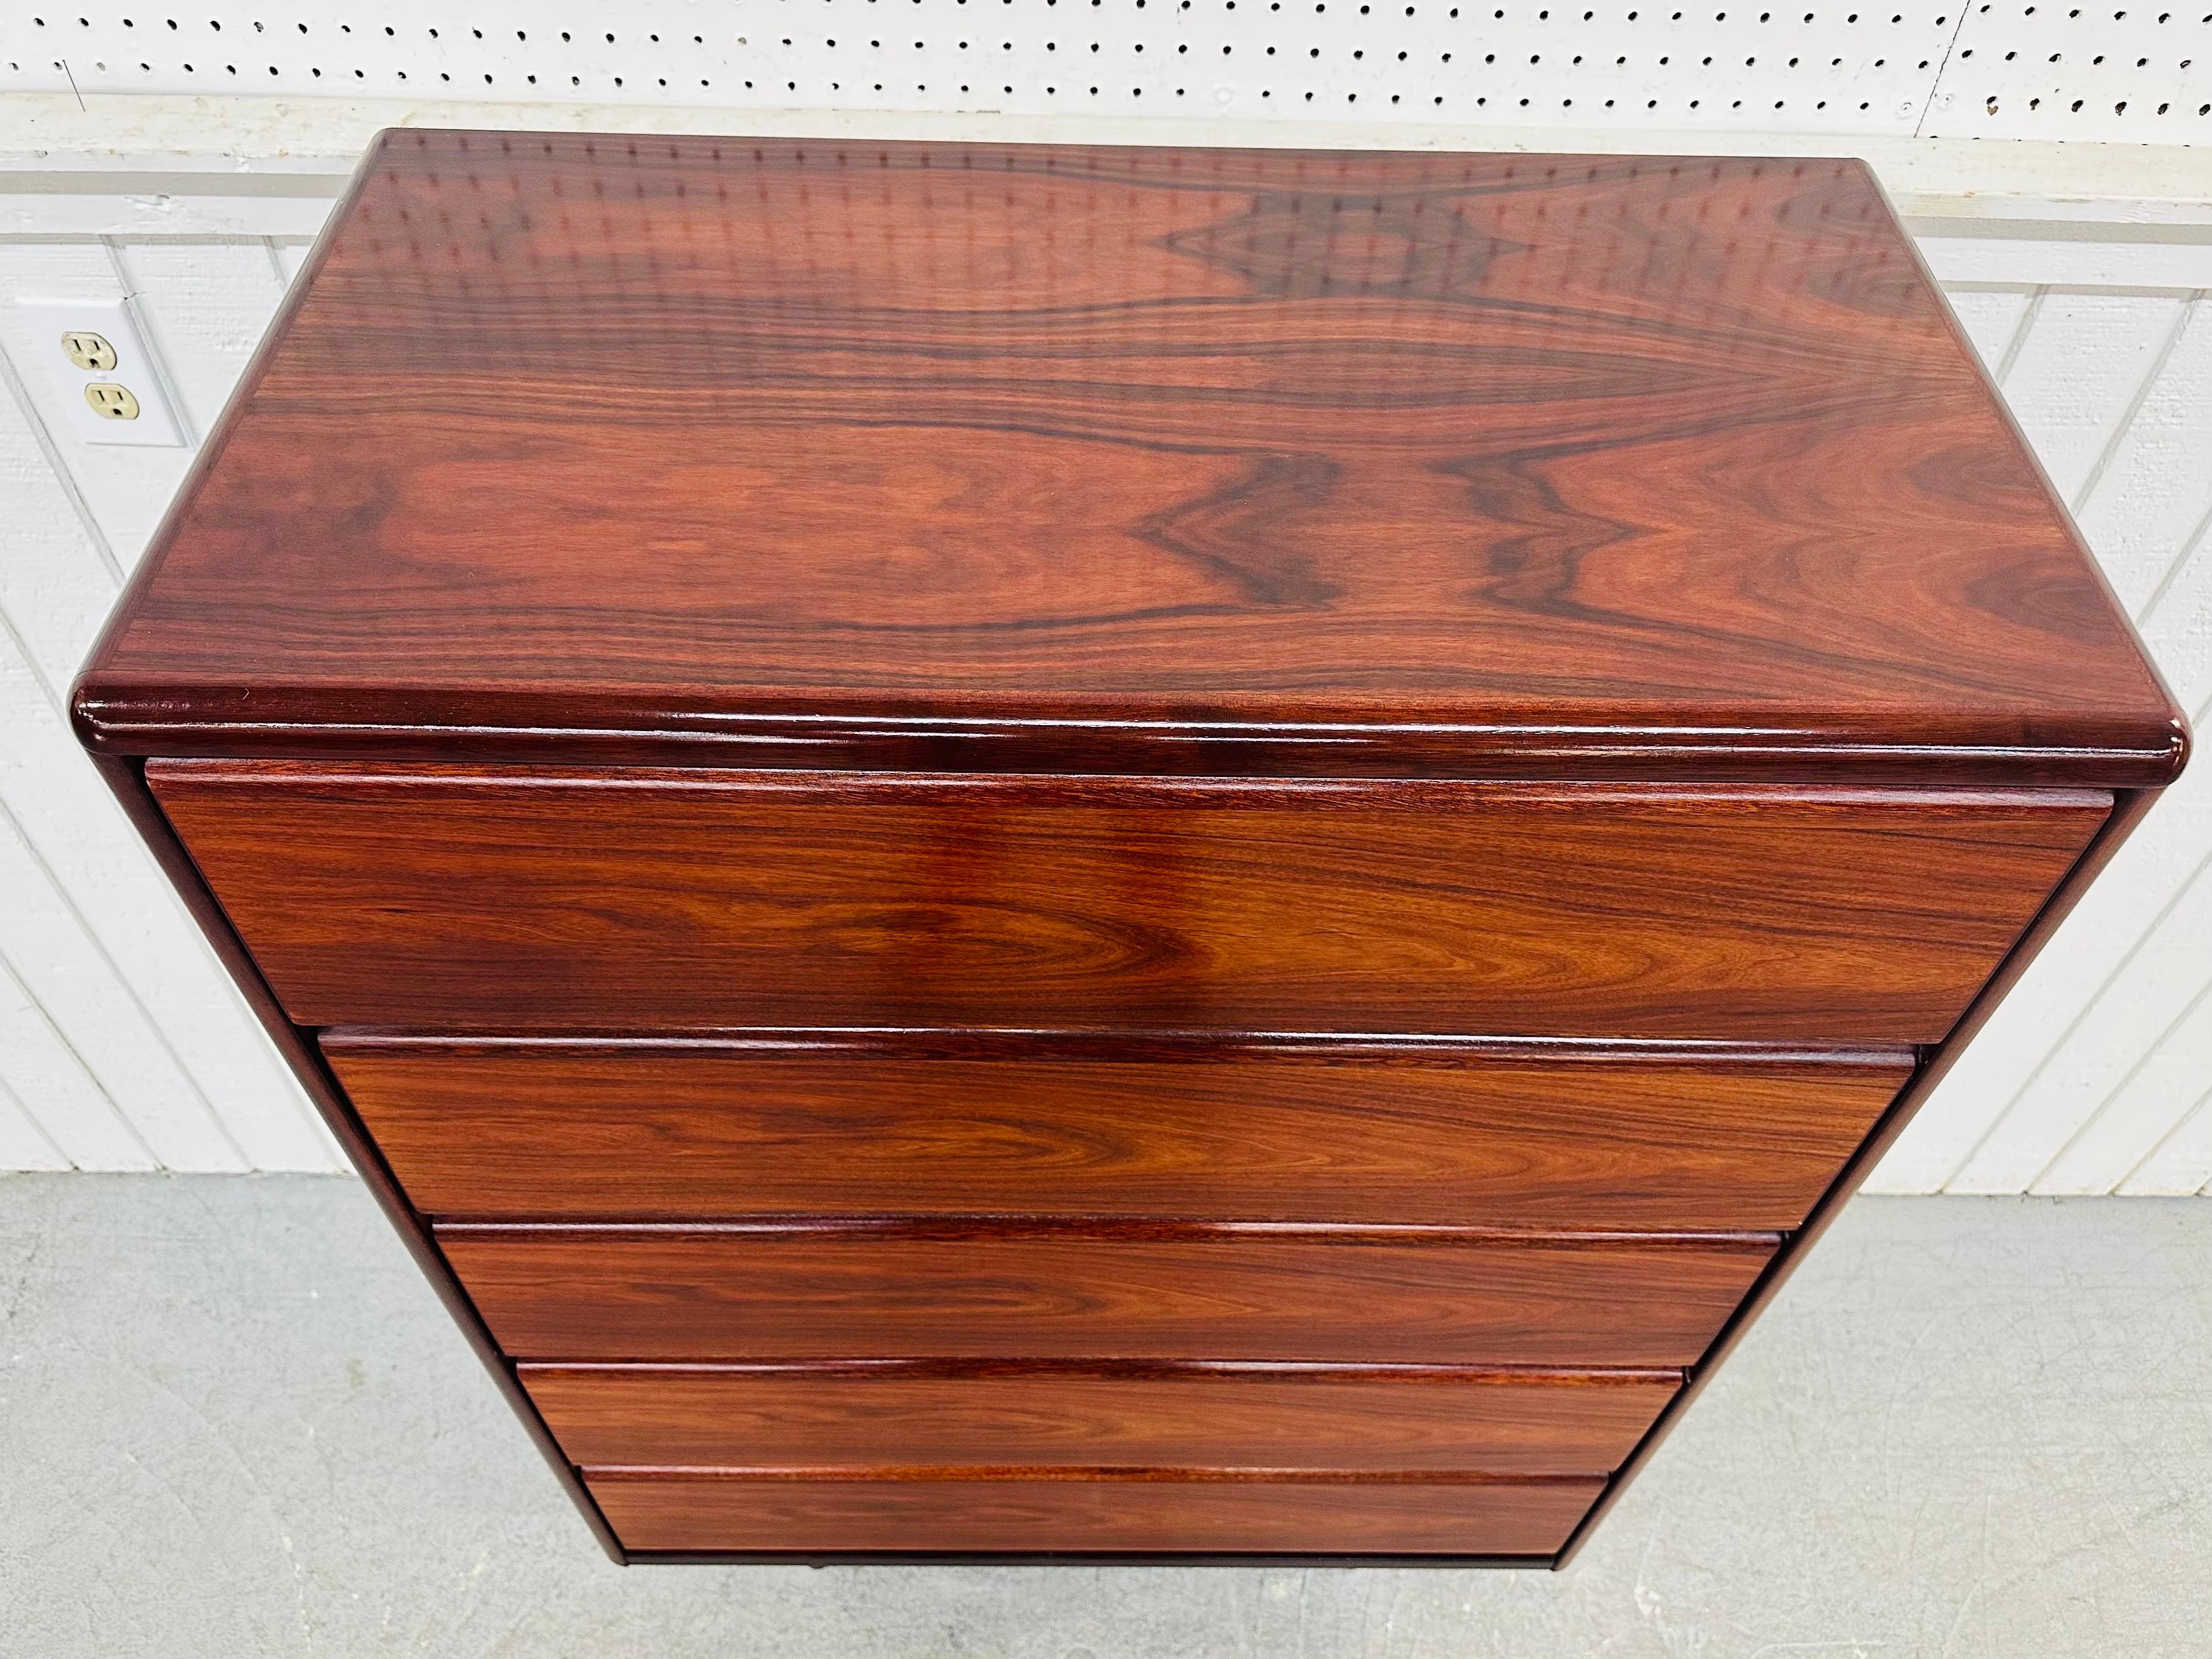 Vintage Danish Modern Rosewood High Chest In Good Condition For Sale In Clarksboro, NJ